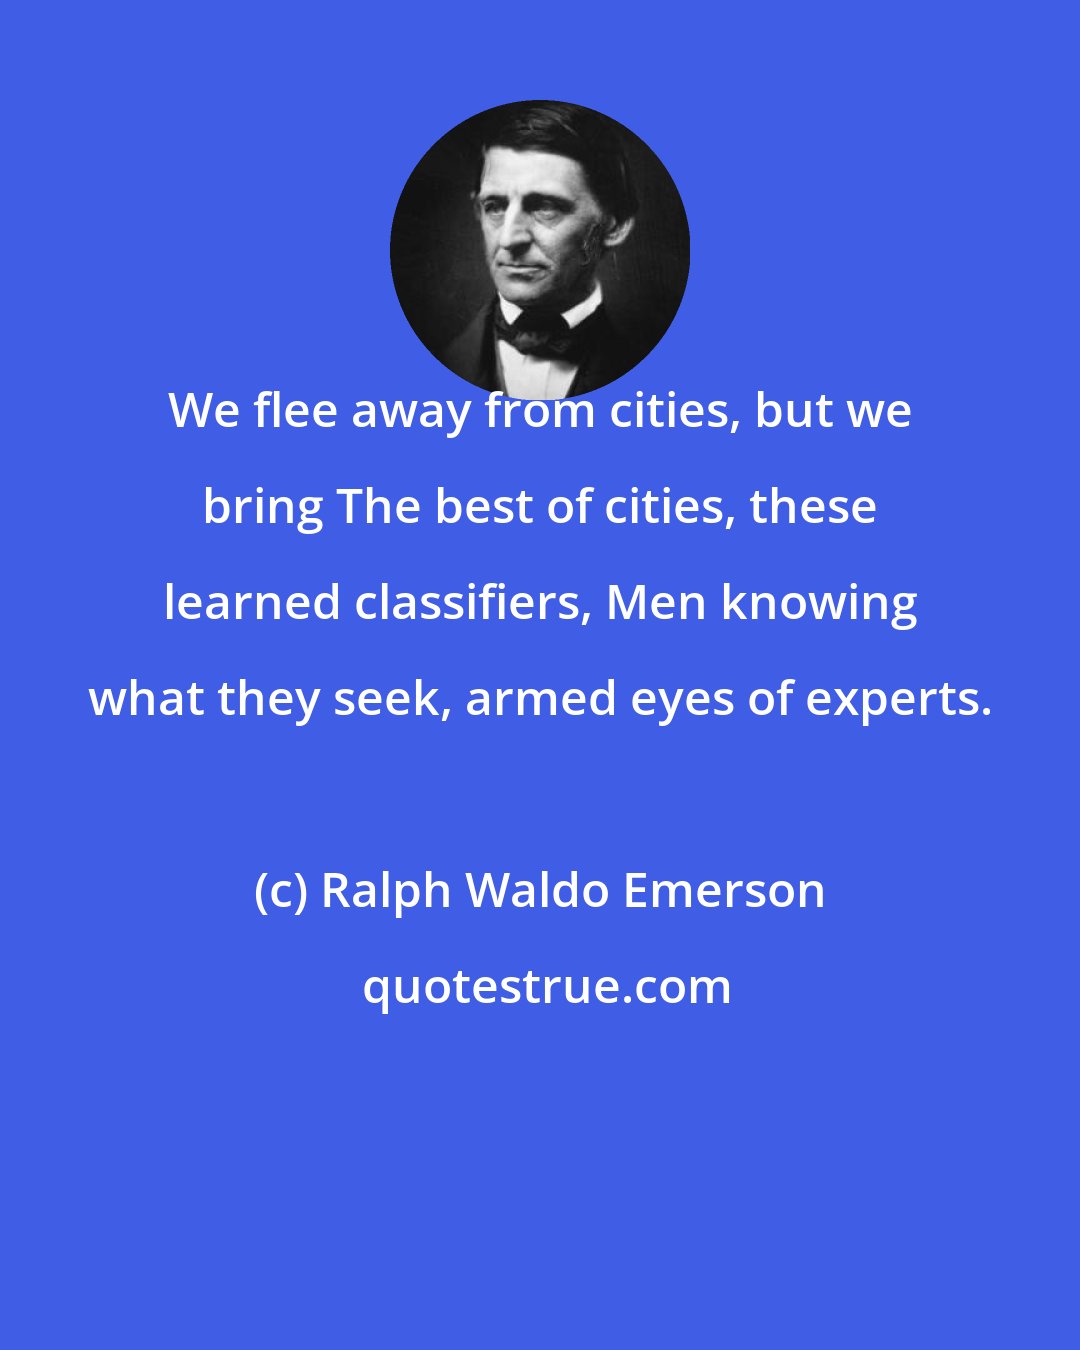 Ralph Waldo Emerson: We flee away from cities, but we bring The best of cities, these learned classifiers, Men knowing what they seek, armed eyes of experts.